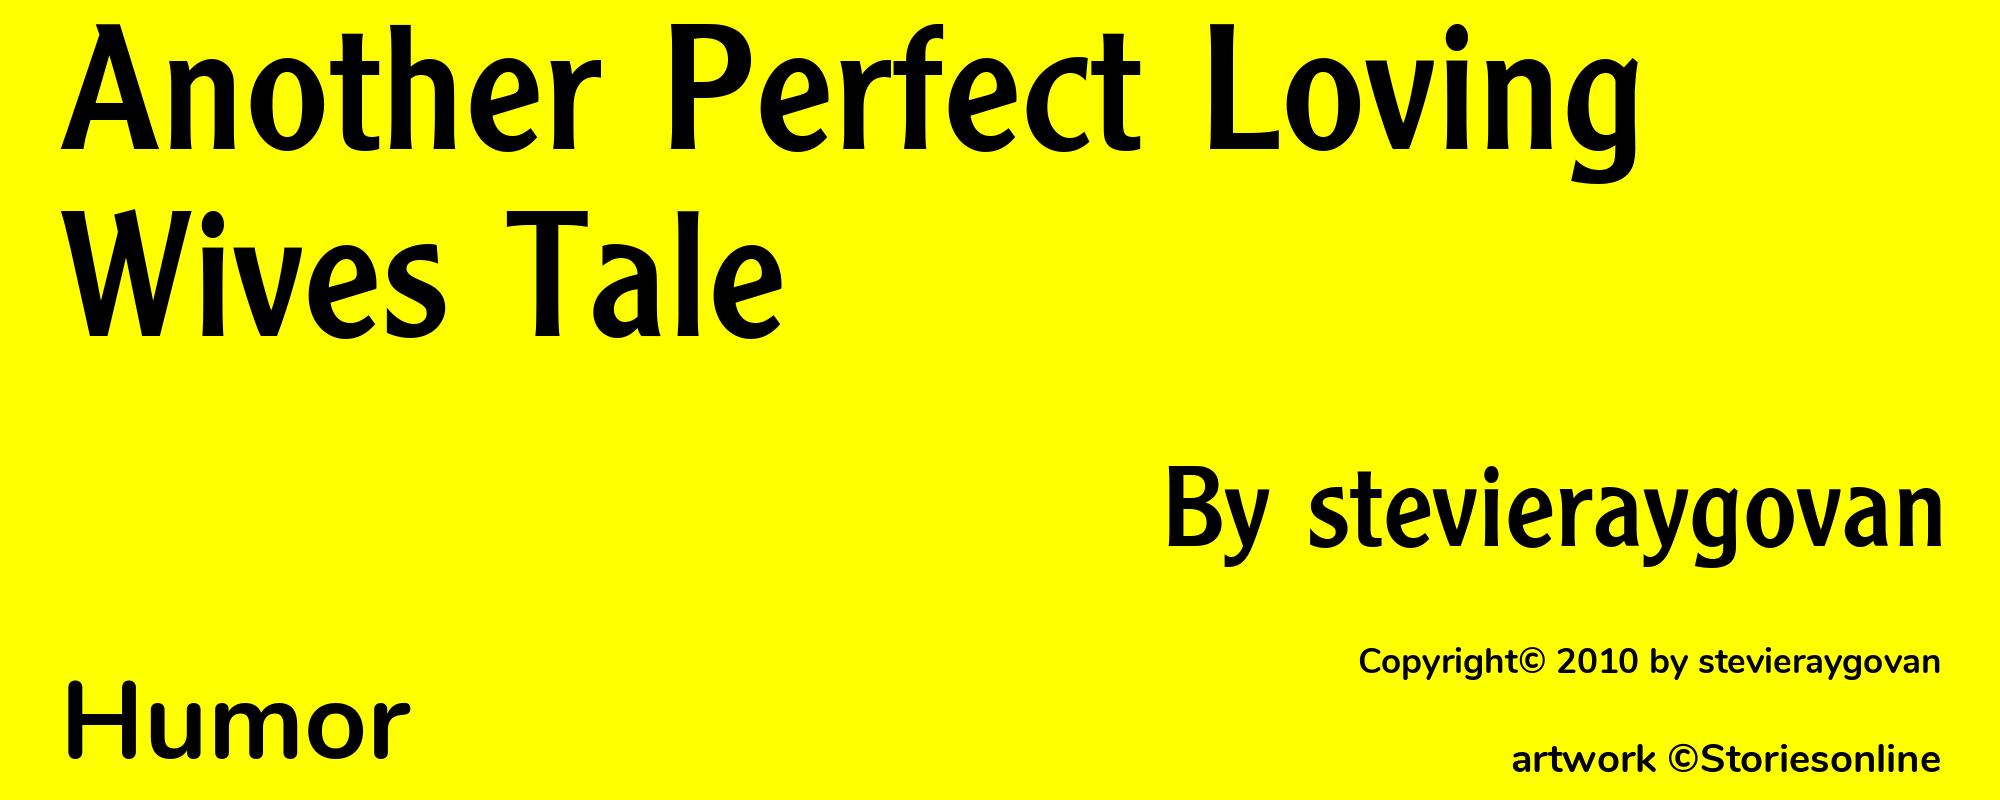 Another Perfect Loving Wives Tale - Cover